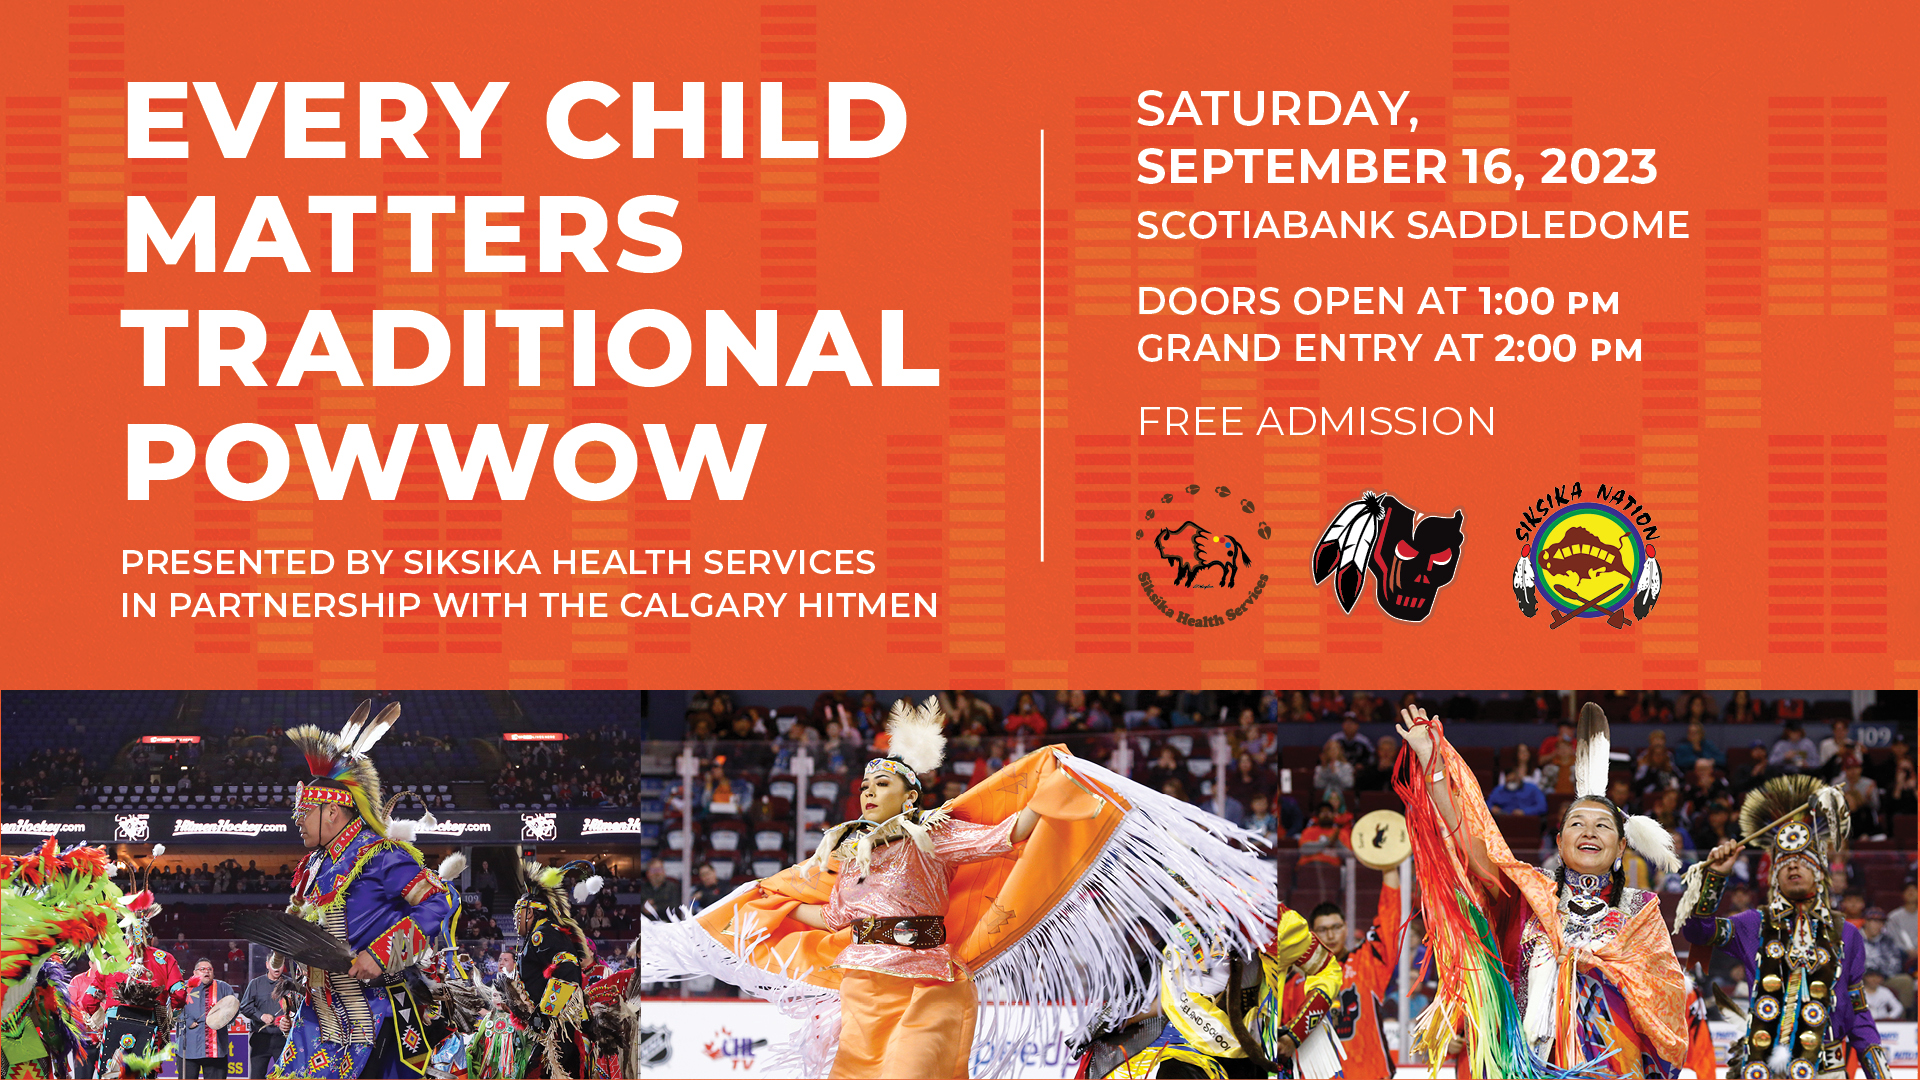 Every Child Matters Traditional Powwow 